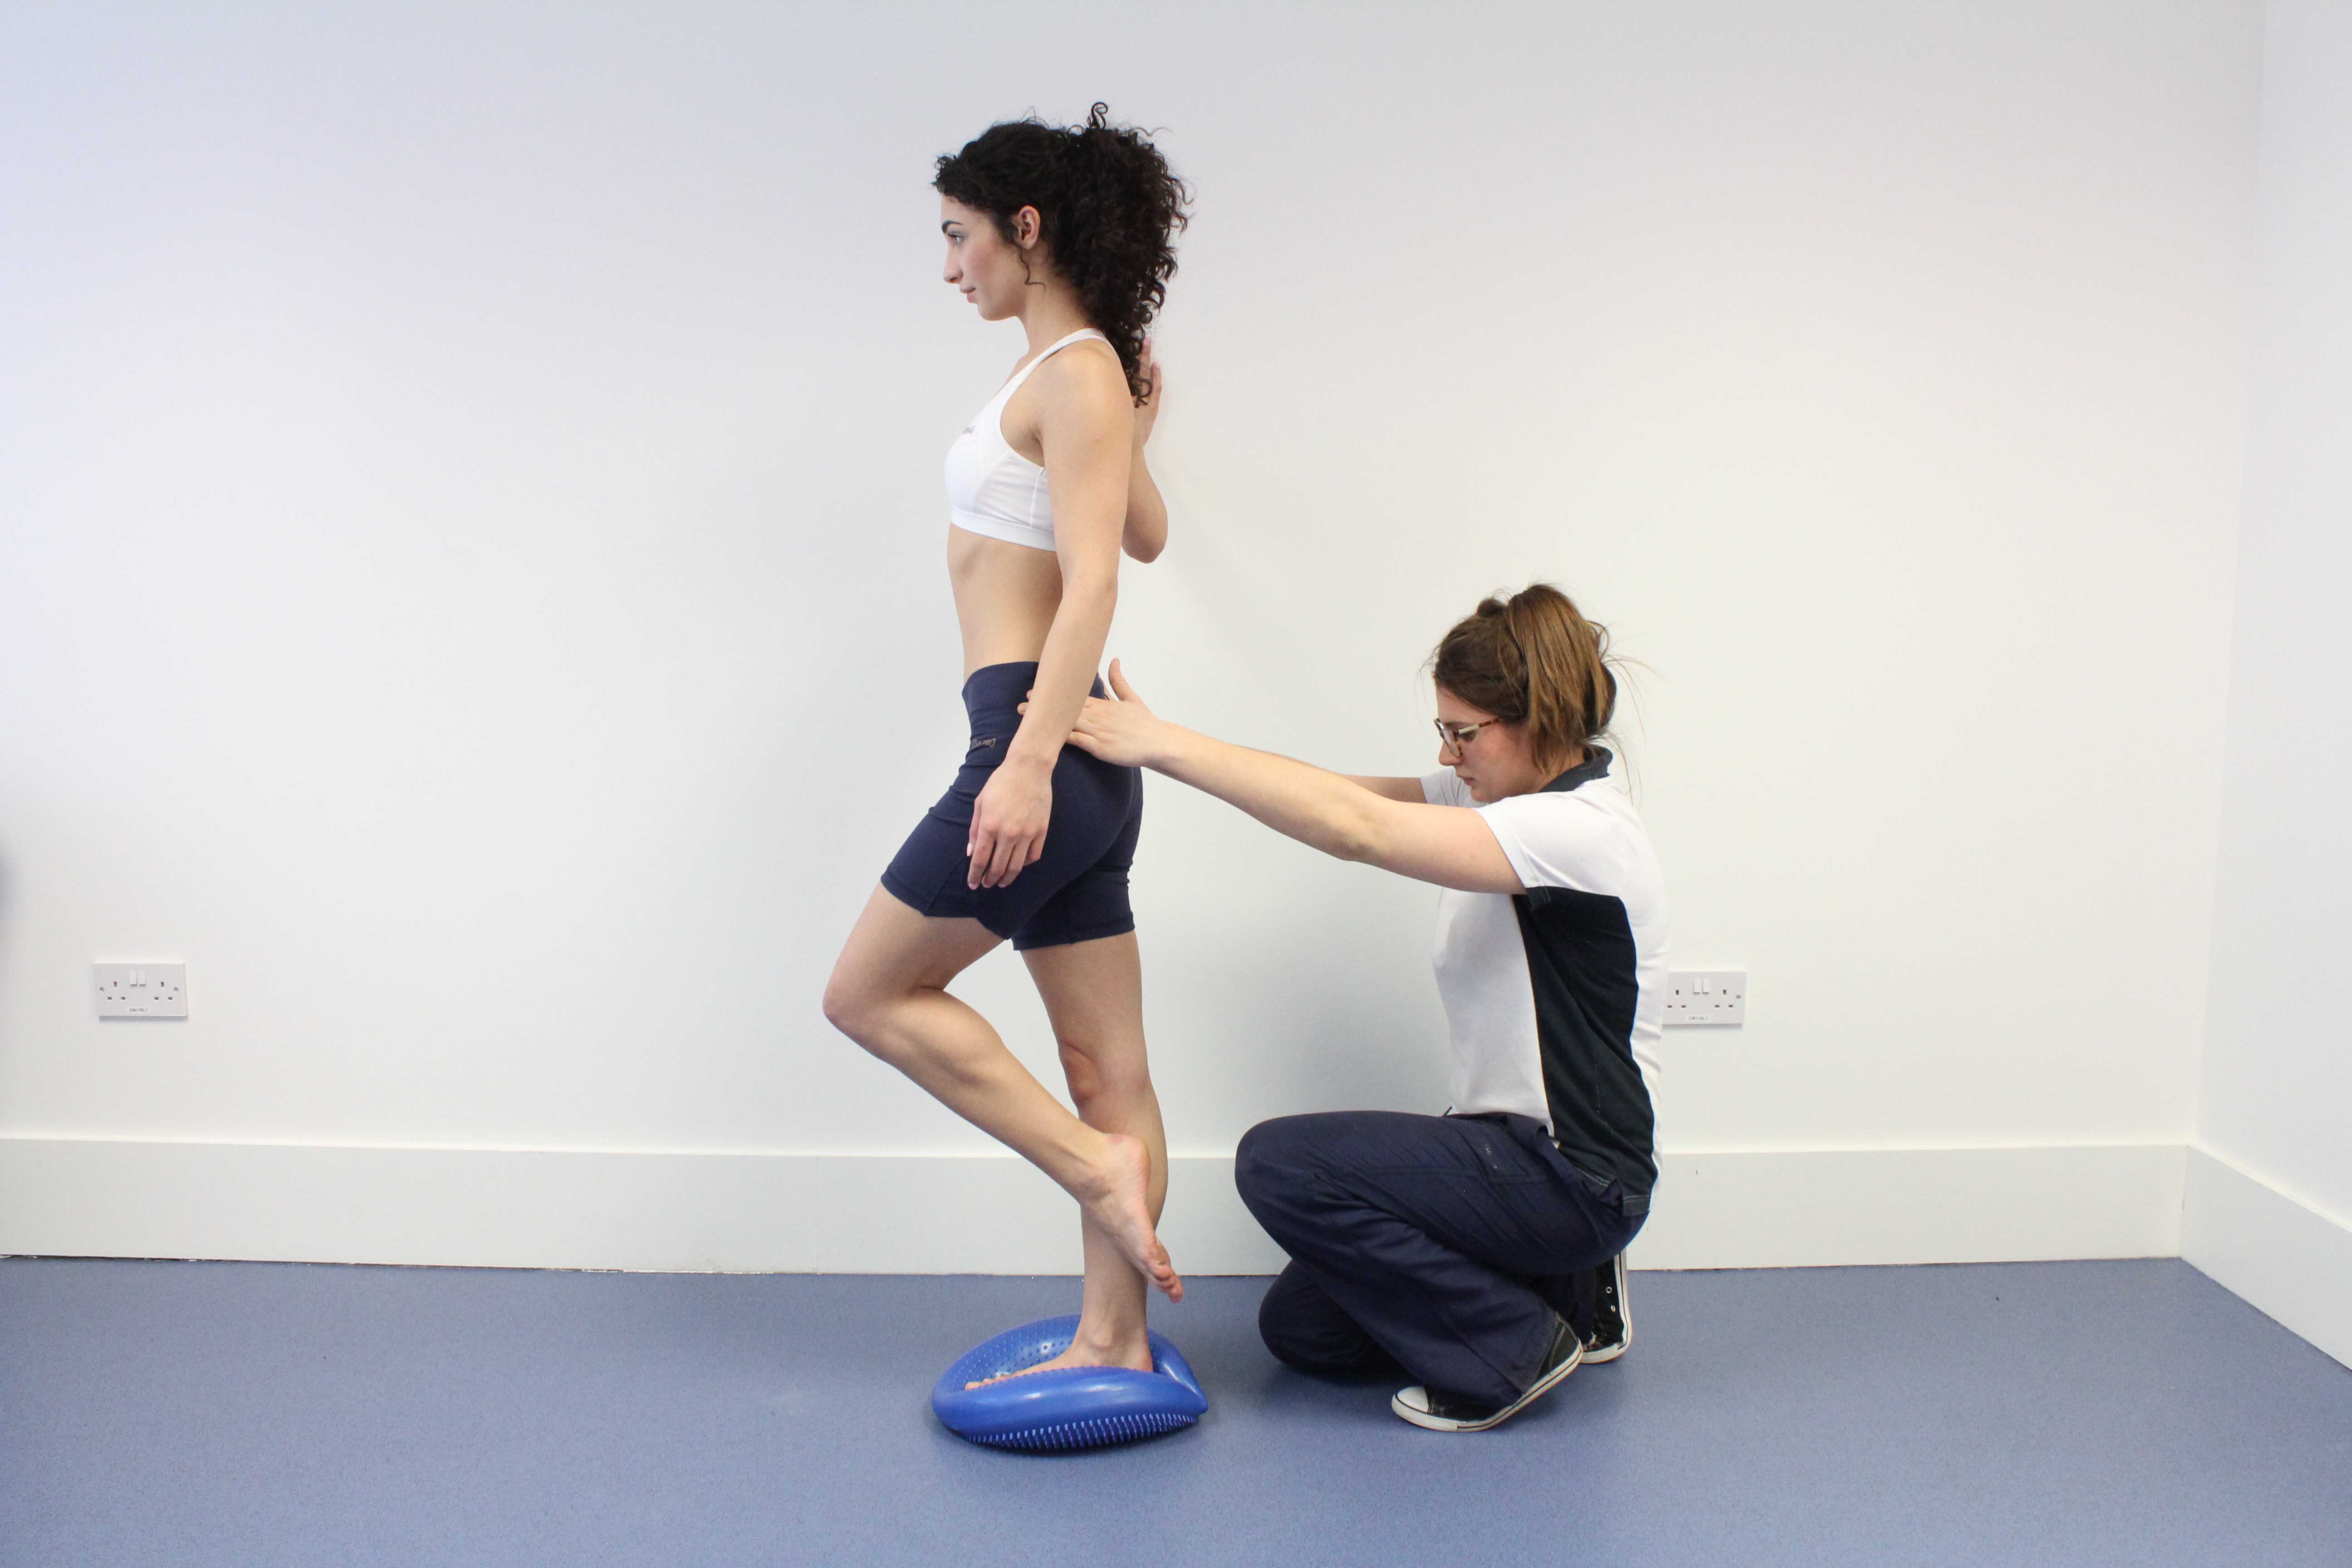 Balance and proprioception exercises assisted by a musculoskeletal physiotherapist